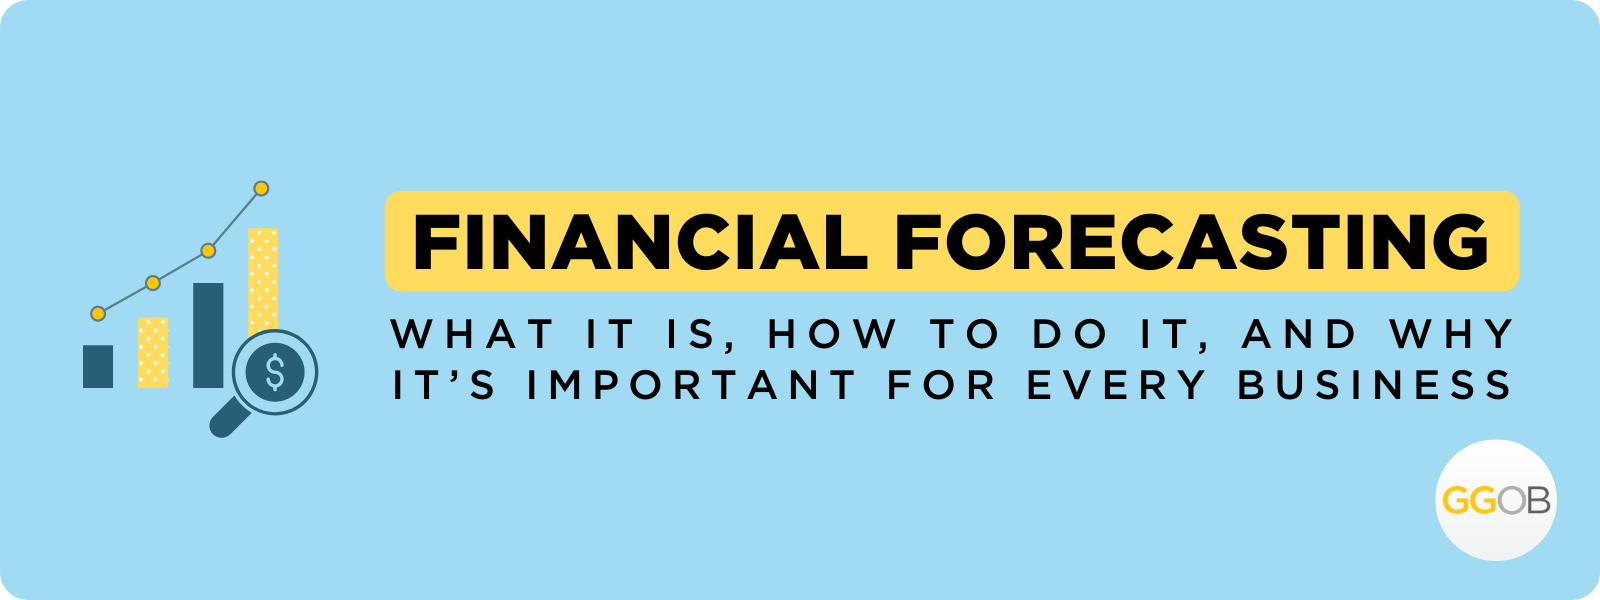 Financial Forecasting: What it Is, How to Do It, And Why It’s Important for Every Business